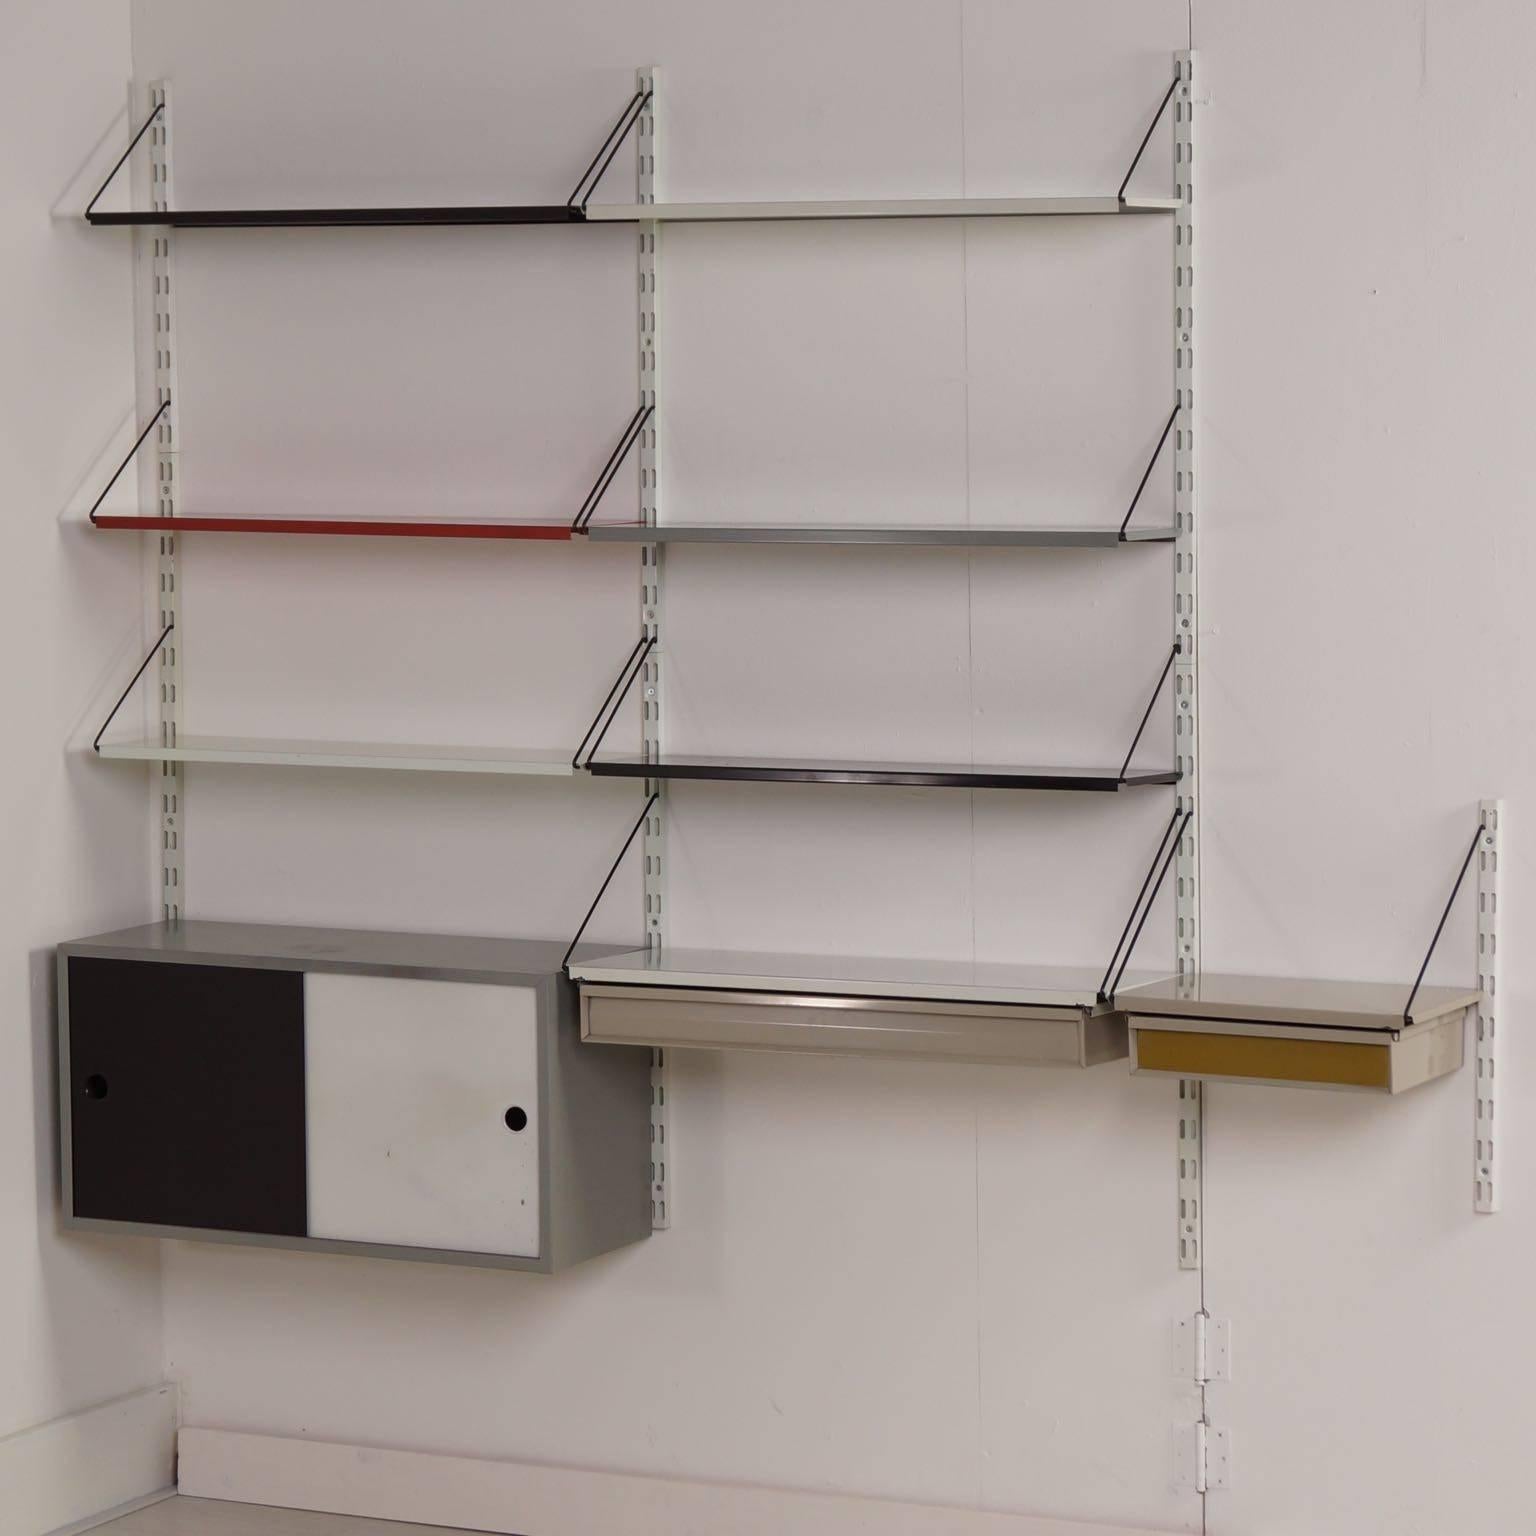 Pilastro wall system by Tjerk Reijenga, 1960s. This wall unit with cabinet and two drawers is designed by Tjerk Reijenga in the 1960s.
Material: Iron with powder coating in the colors red, black, white, gray, green and beige. This set consists of